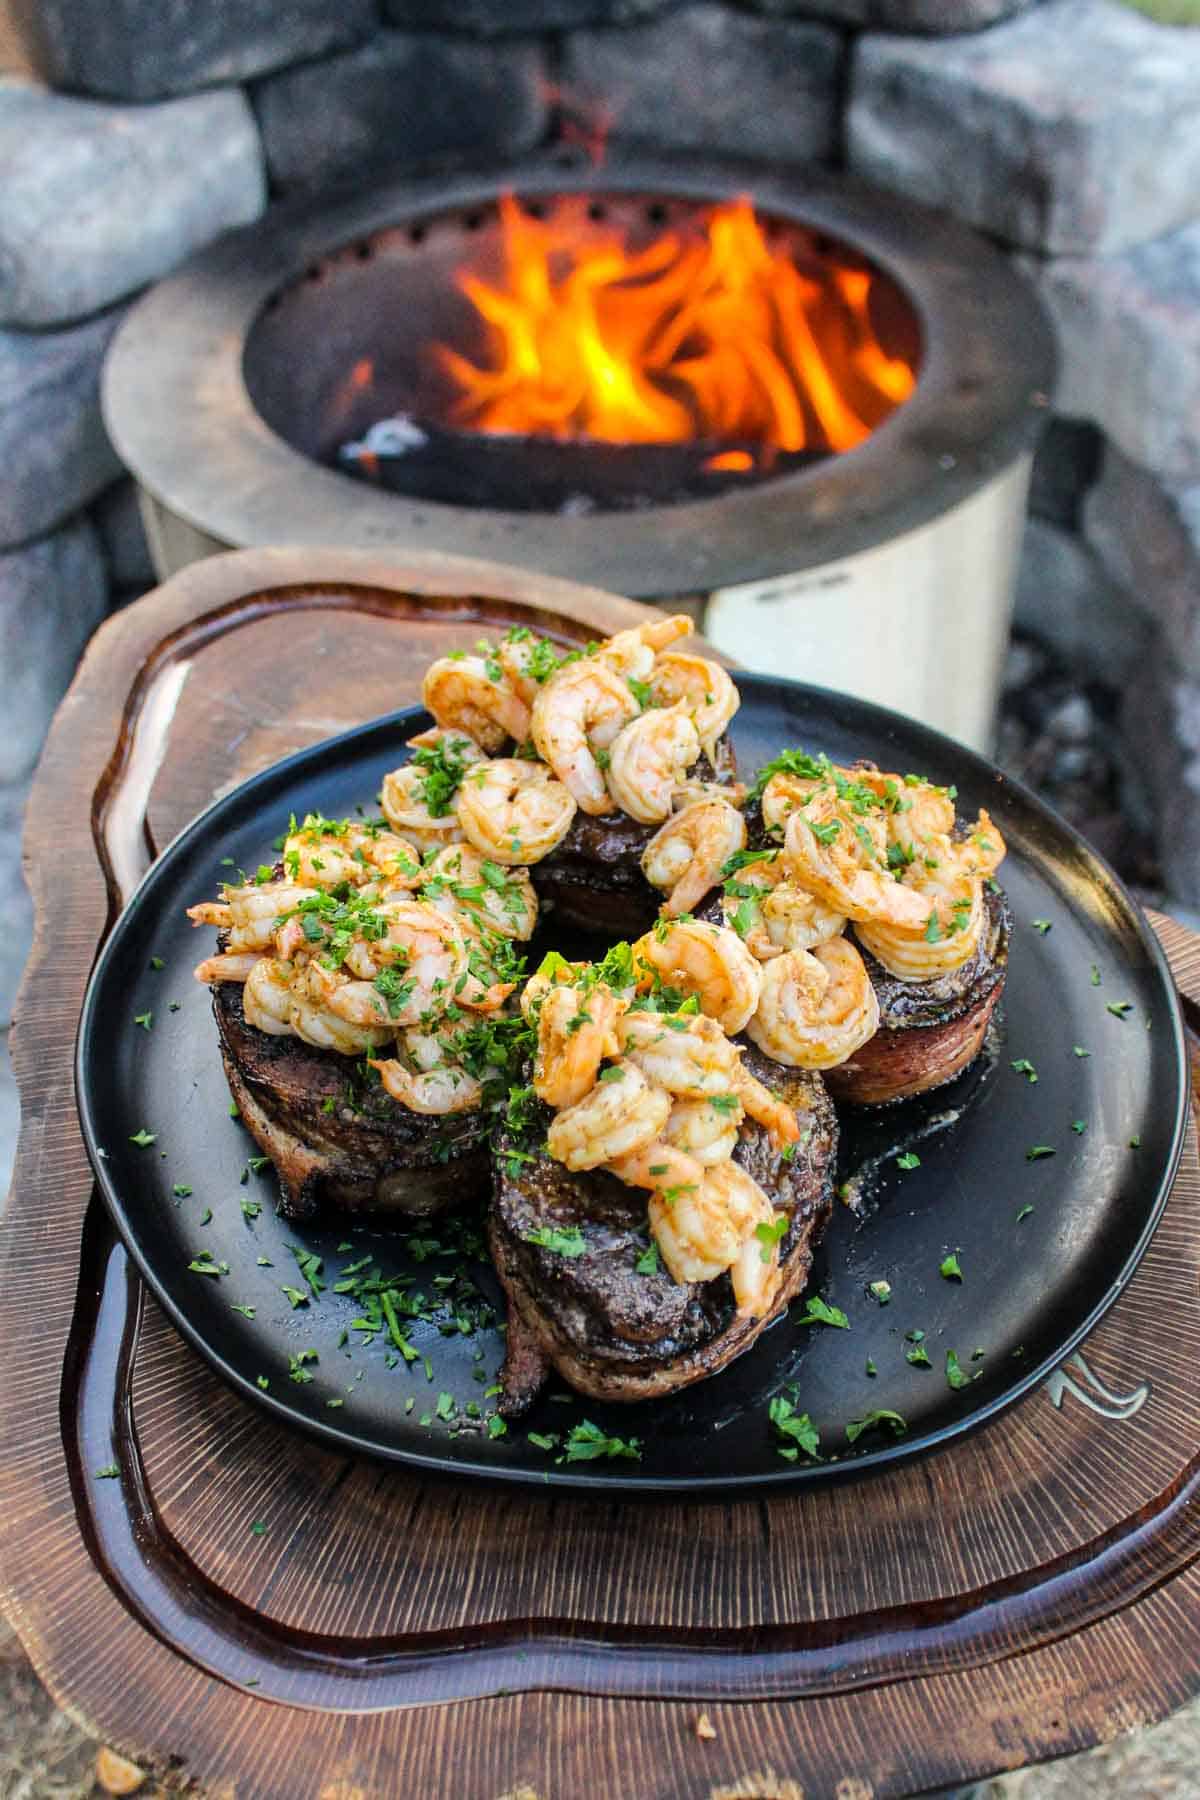 Bacon Wrapped Filet Mignon with Garlic Shrimp plated and ready to serve.